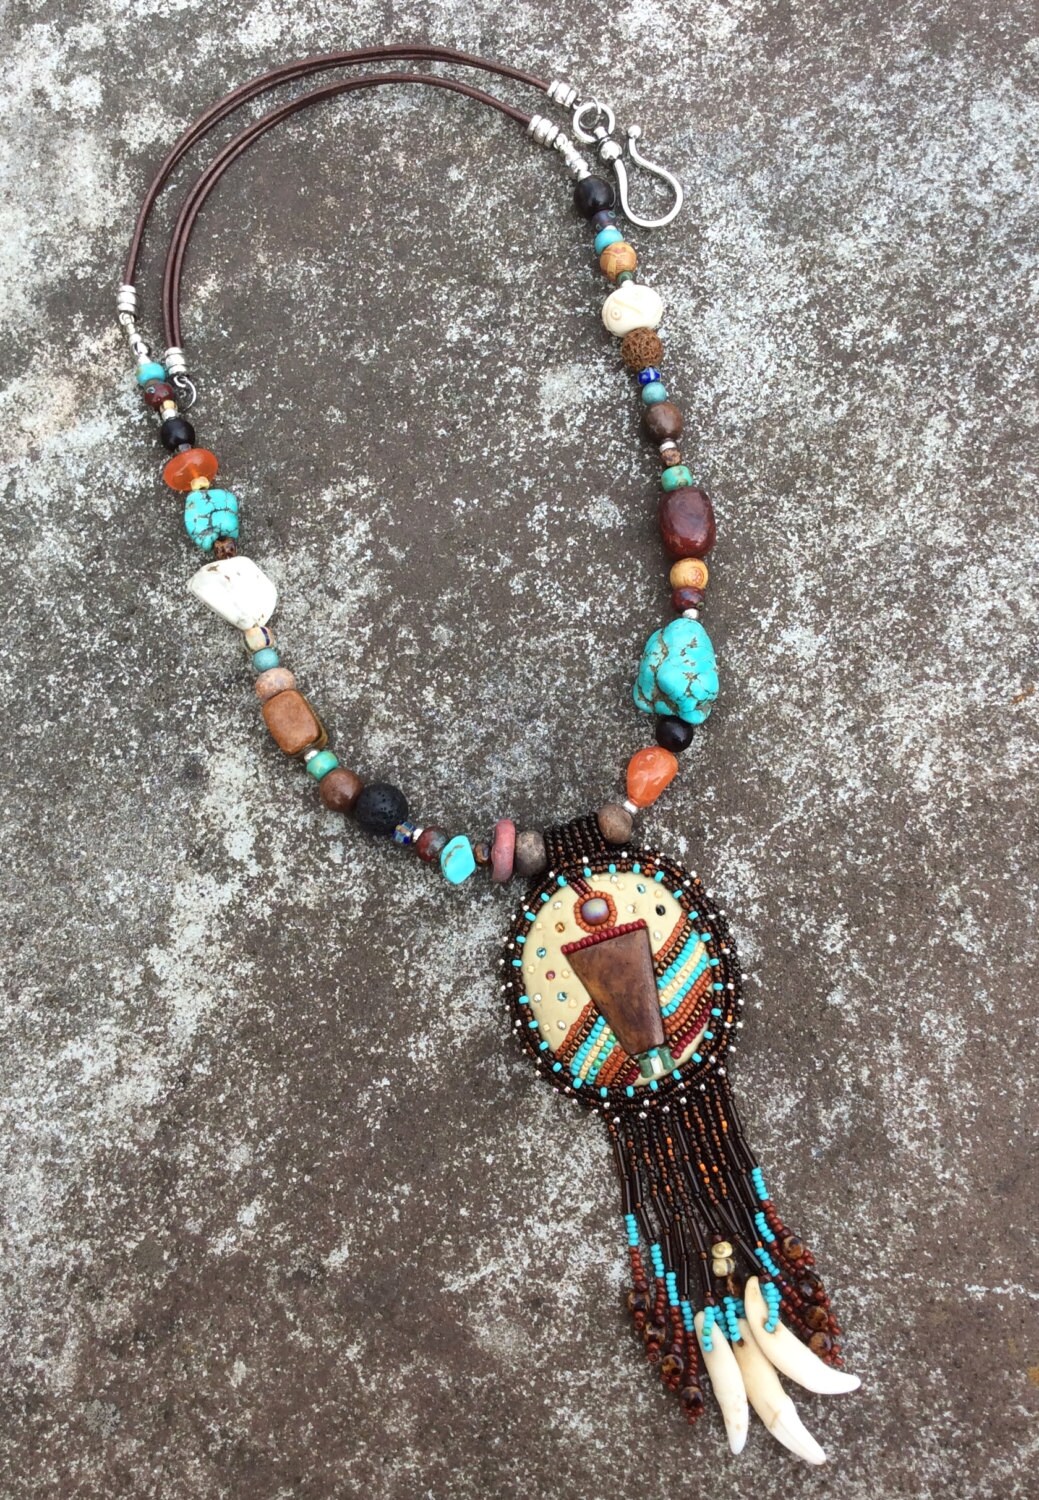 Native American Star People Mosaic Necklace Tribal Necklace